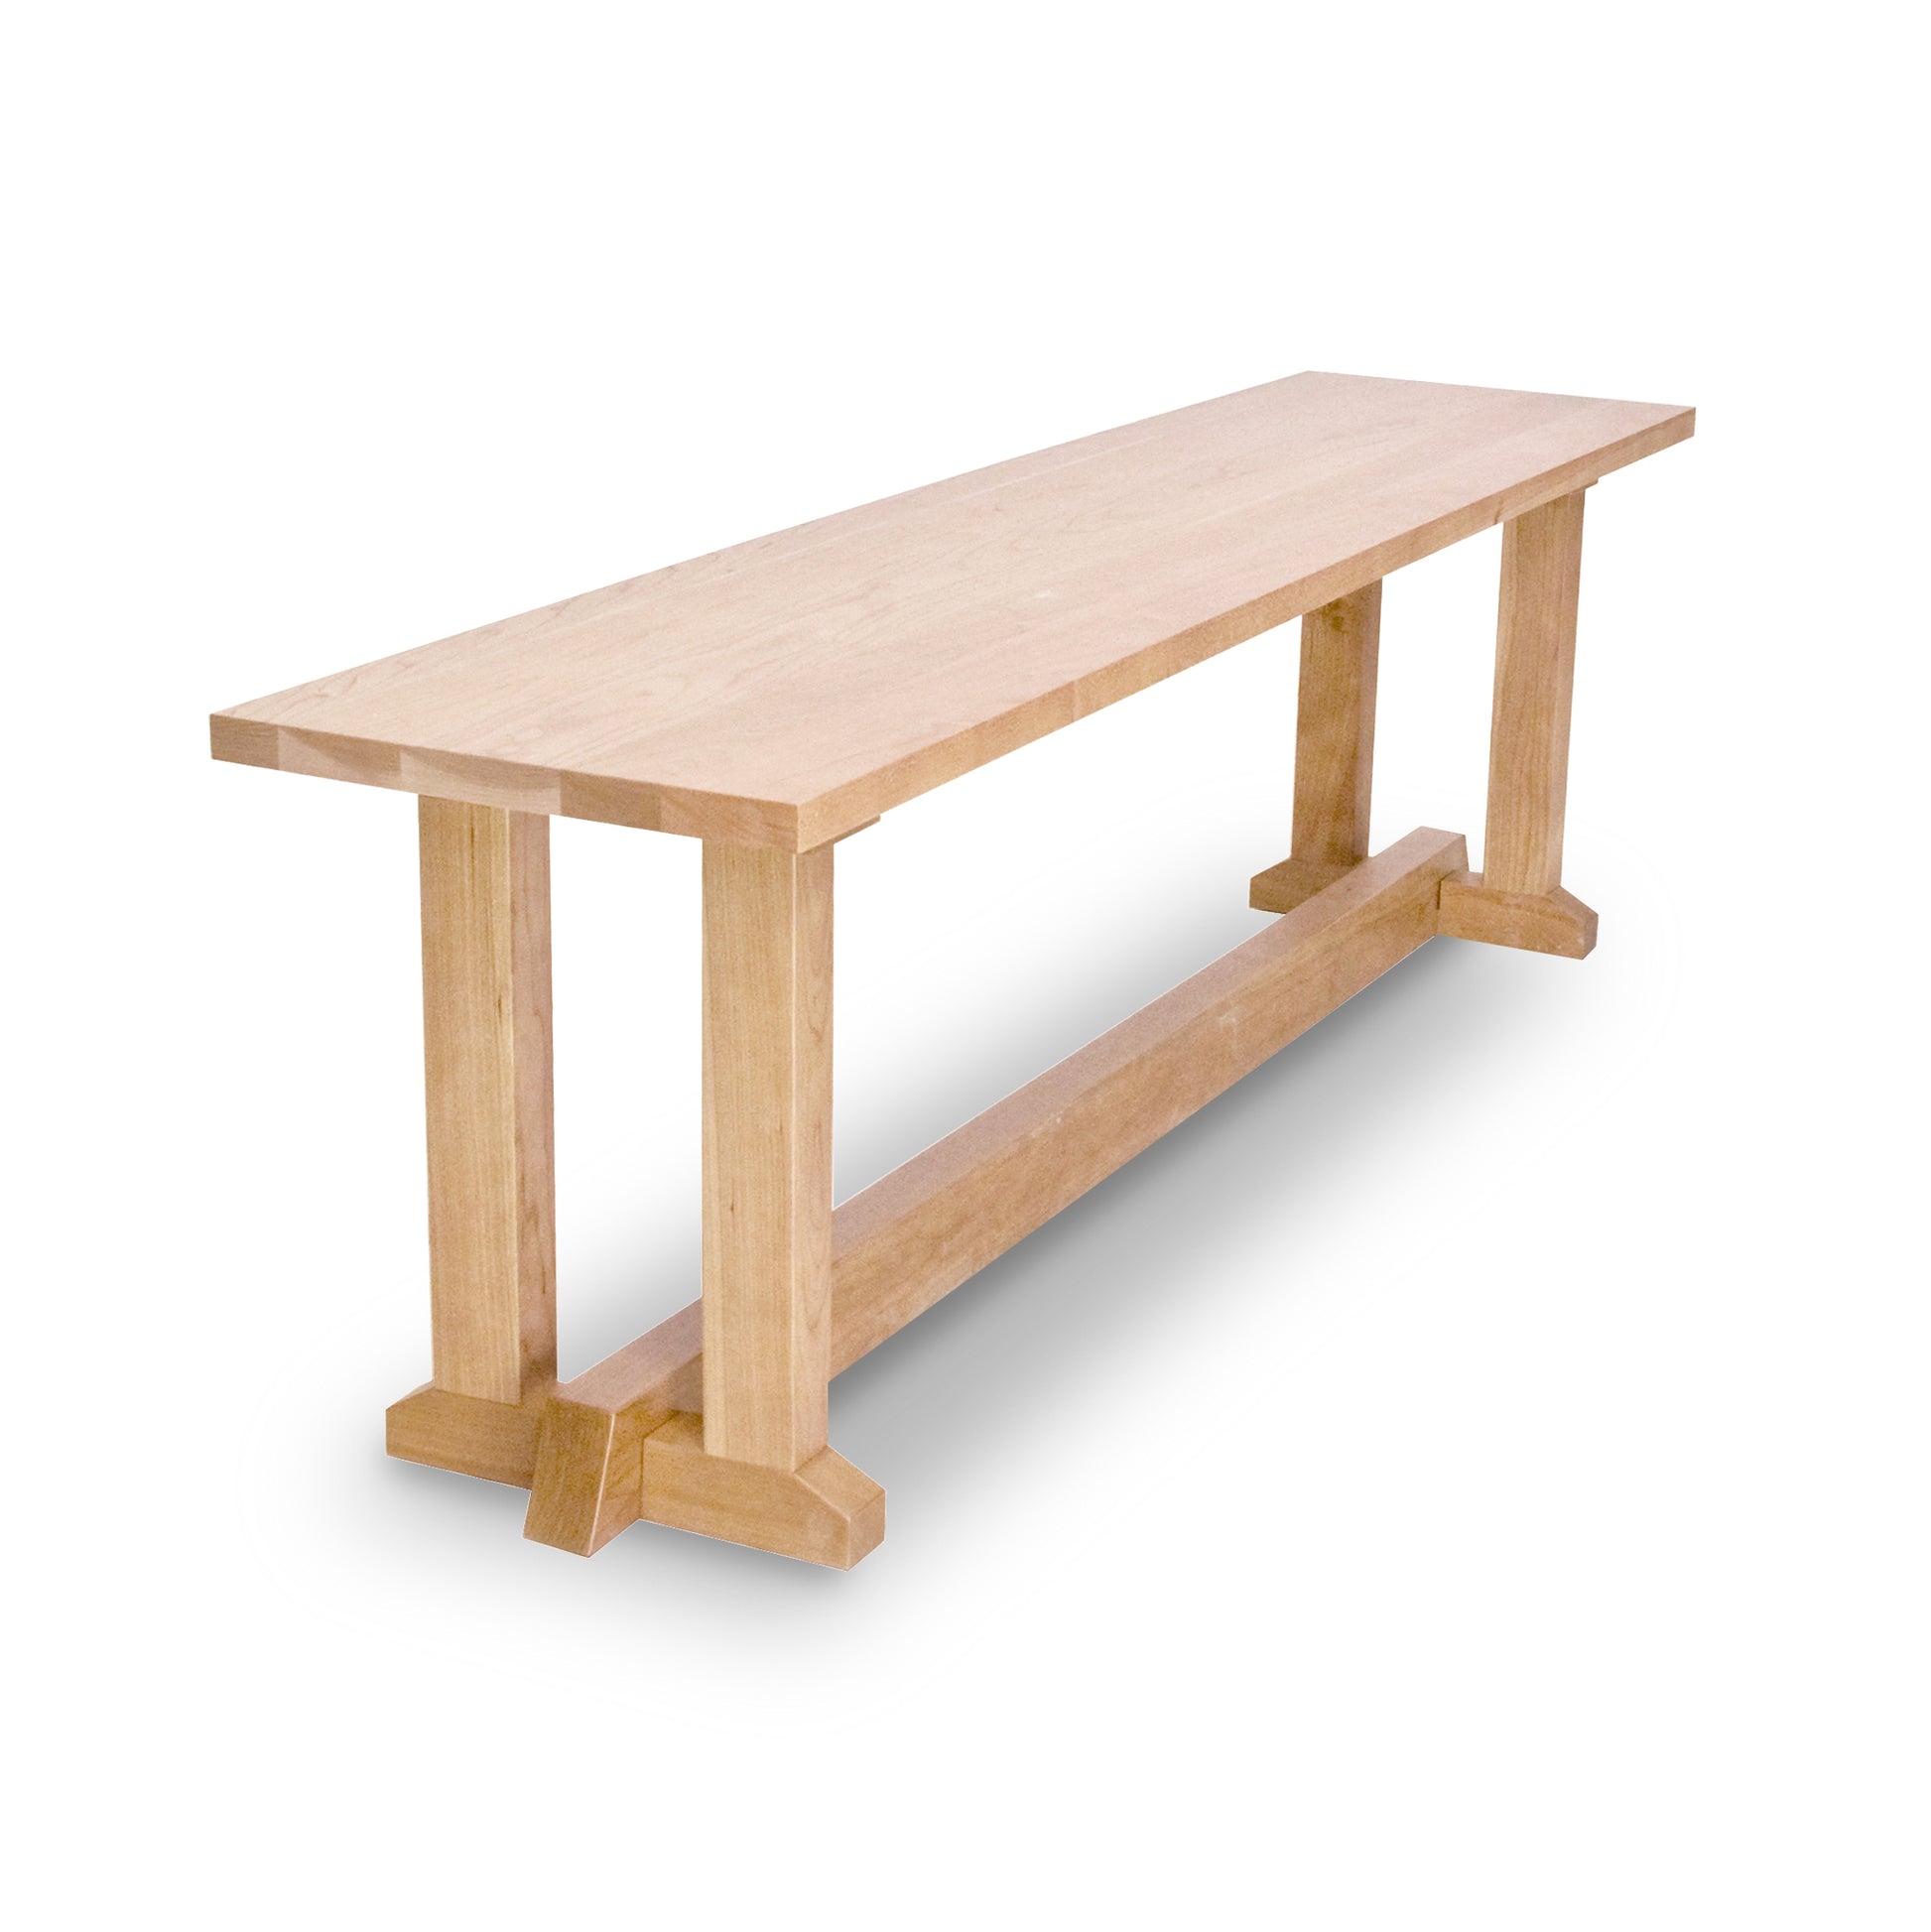 An eco-friendly Boston Trestle Bench by Lyndon Furniture, made from sustainably harvested solid woods, with two legs, on a white background.